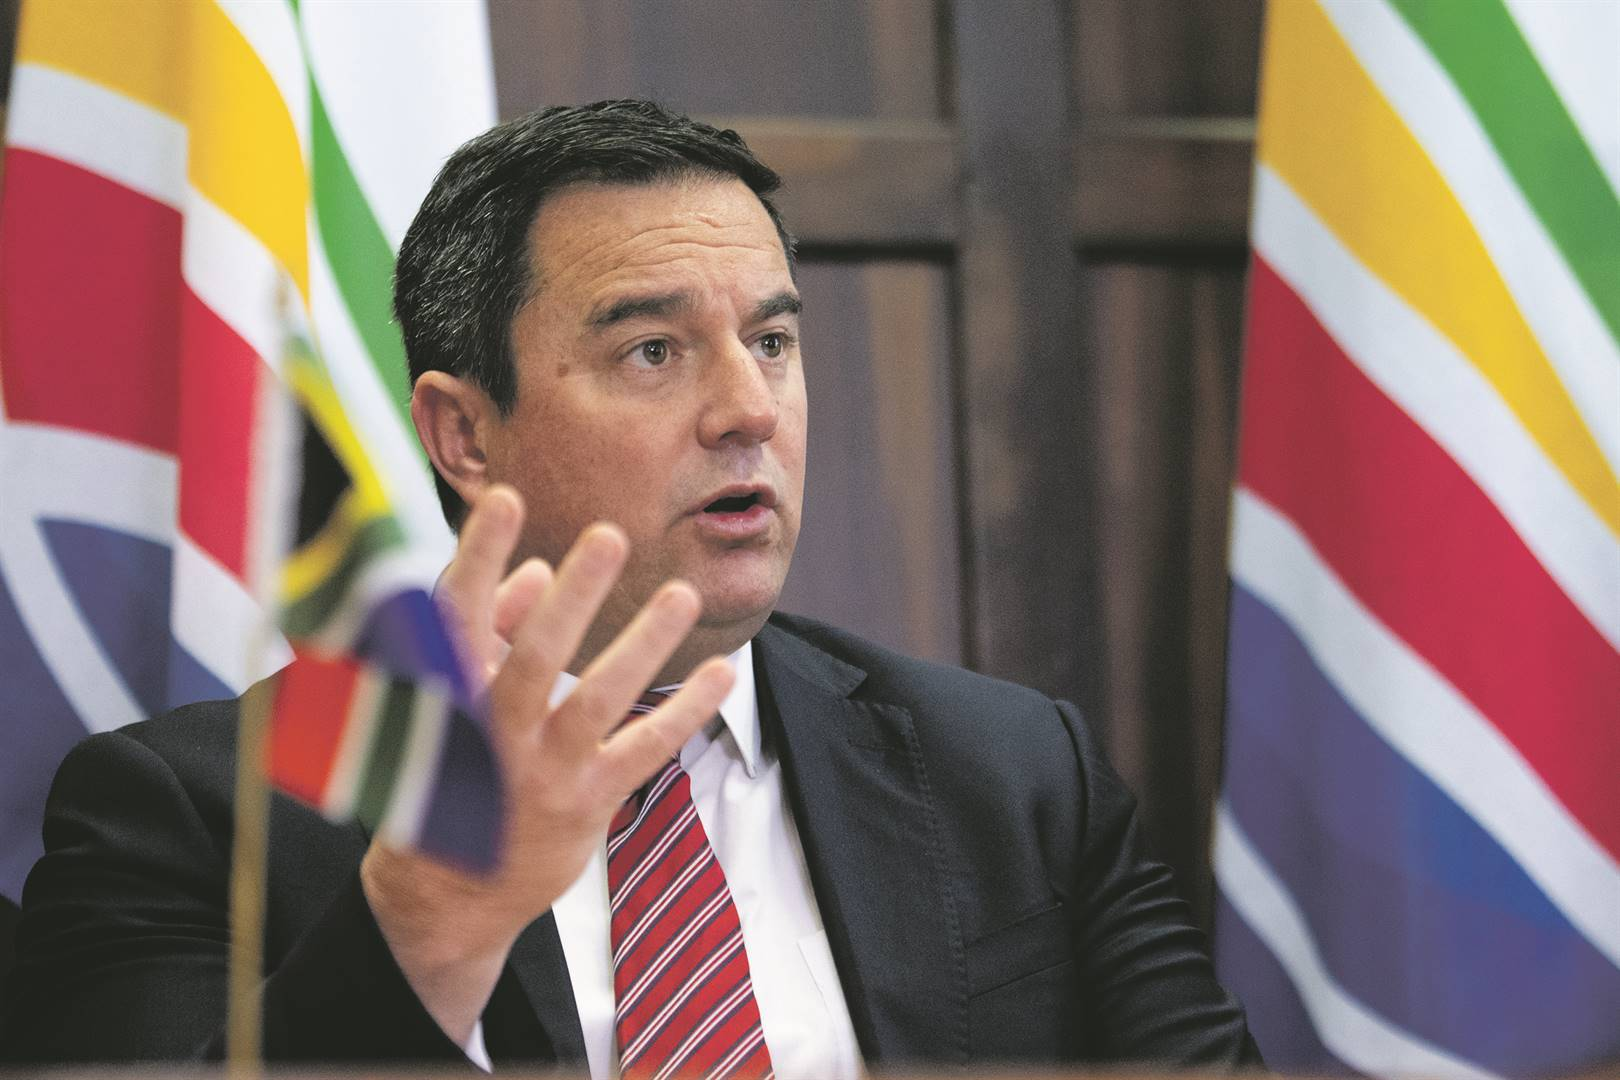 DA to challenge Presidency’s decision to hide findings into alleged arms shipment to Russia